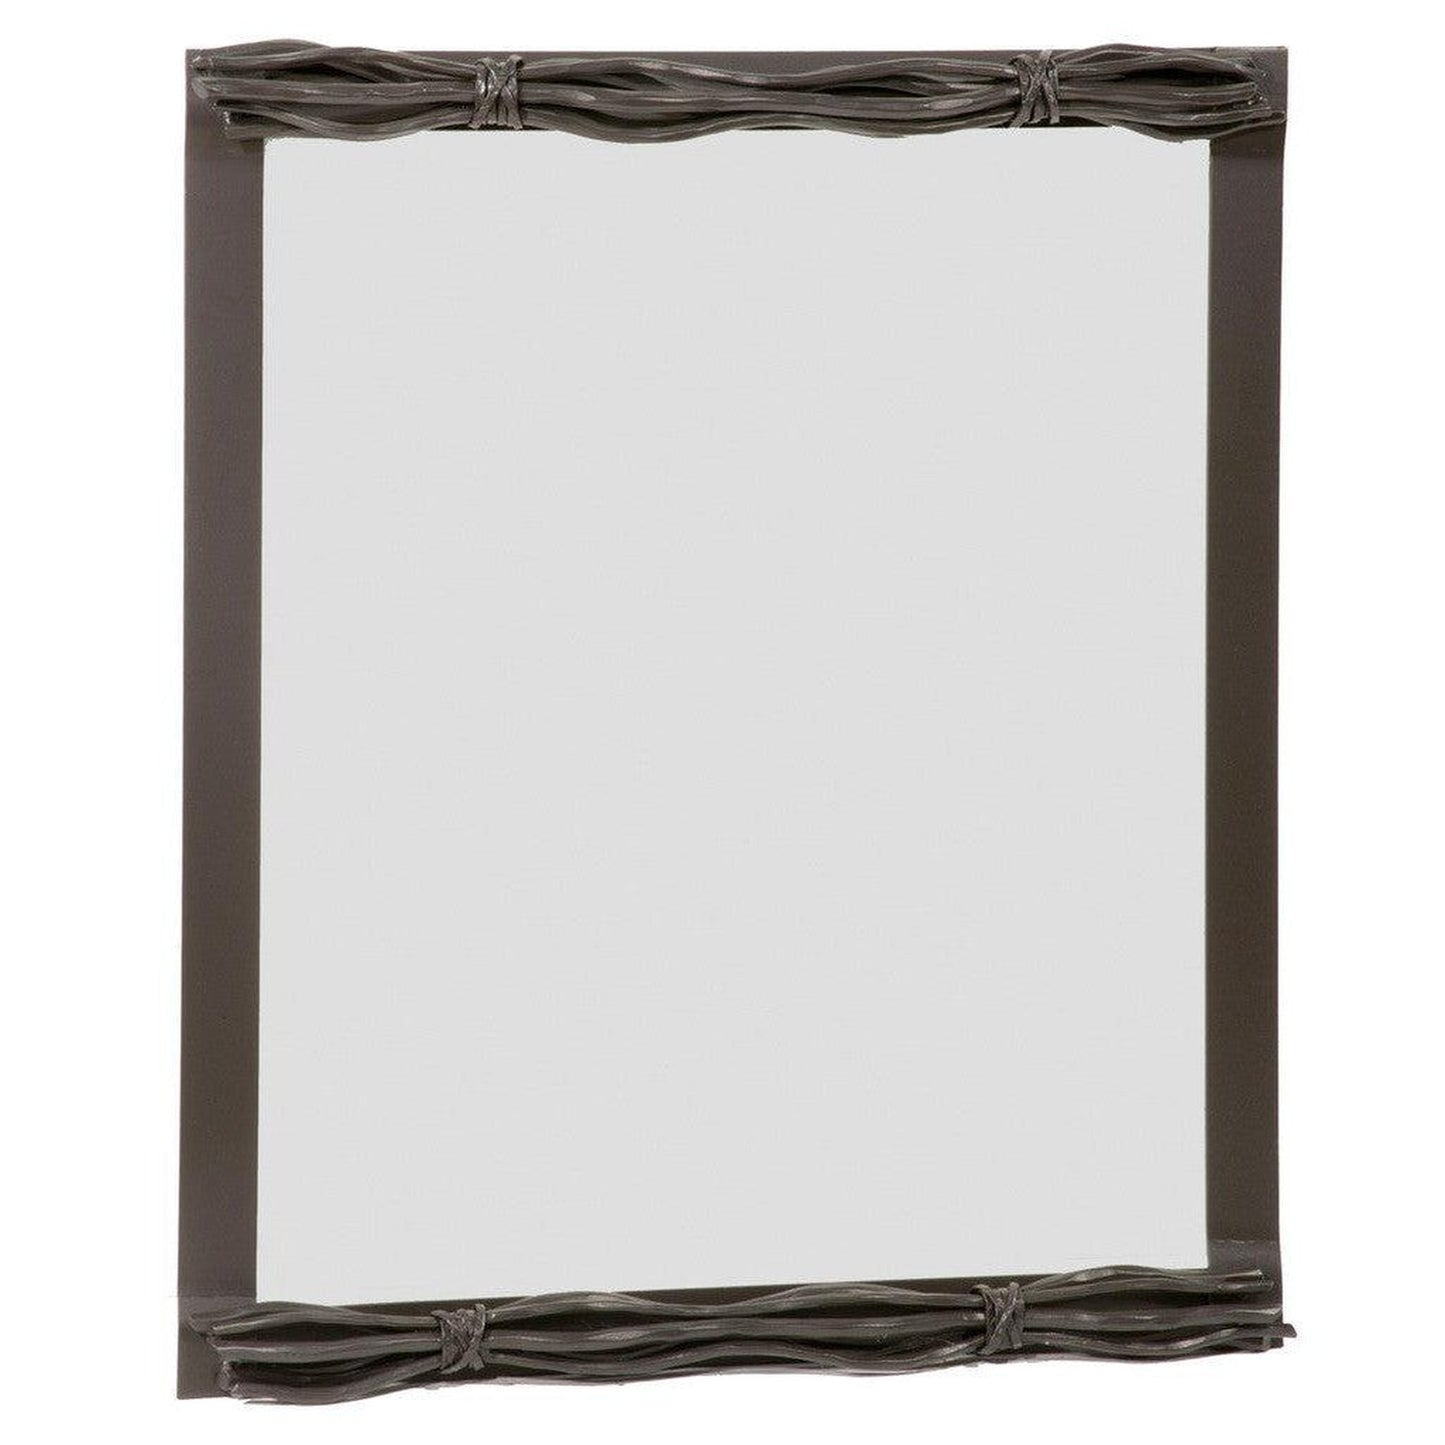 Stone County Ironworks Rush 21" x 26" Small Natural Black Iron Wall Mirror With Gold Iron Accent